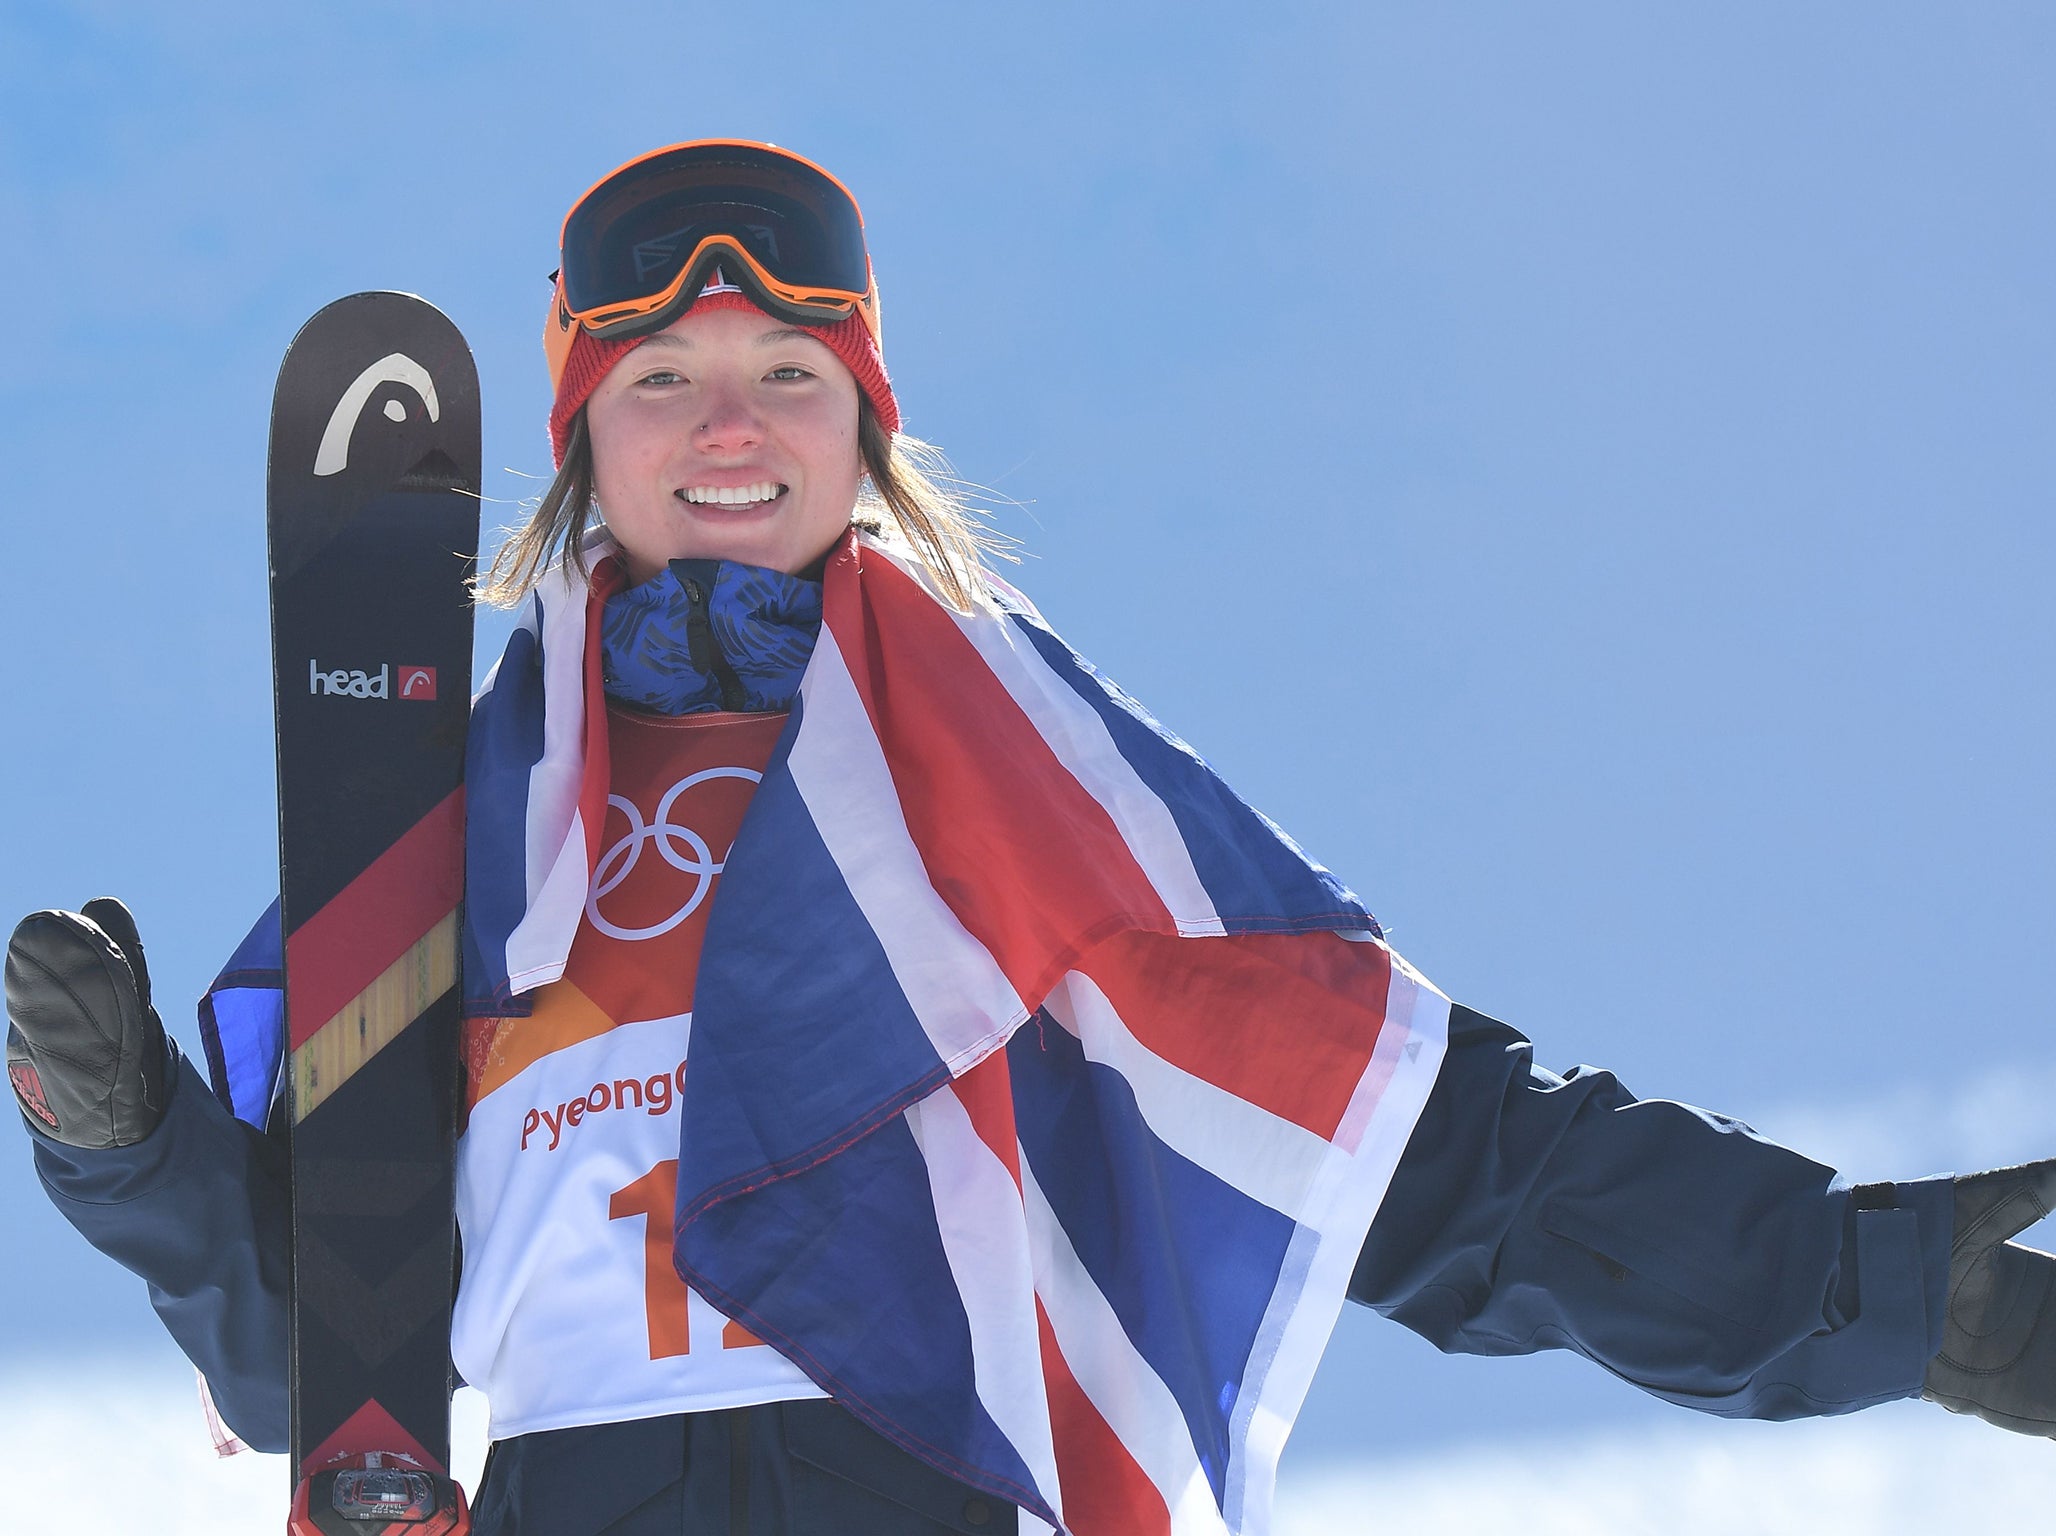 Atkin is Team GB's second medalist at the 2018 Winter Olympics